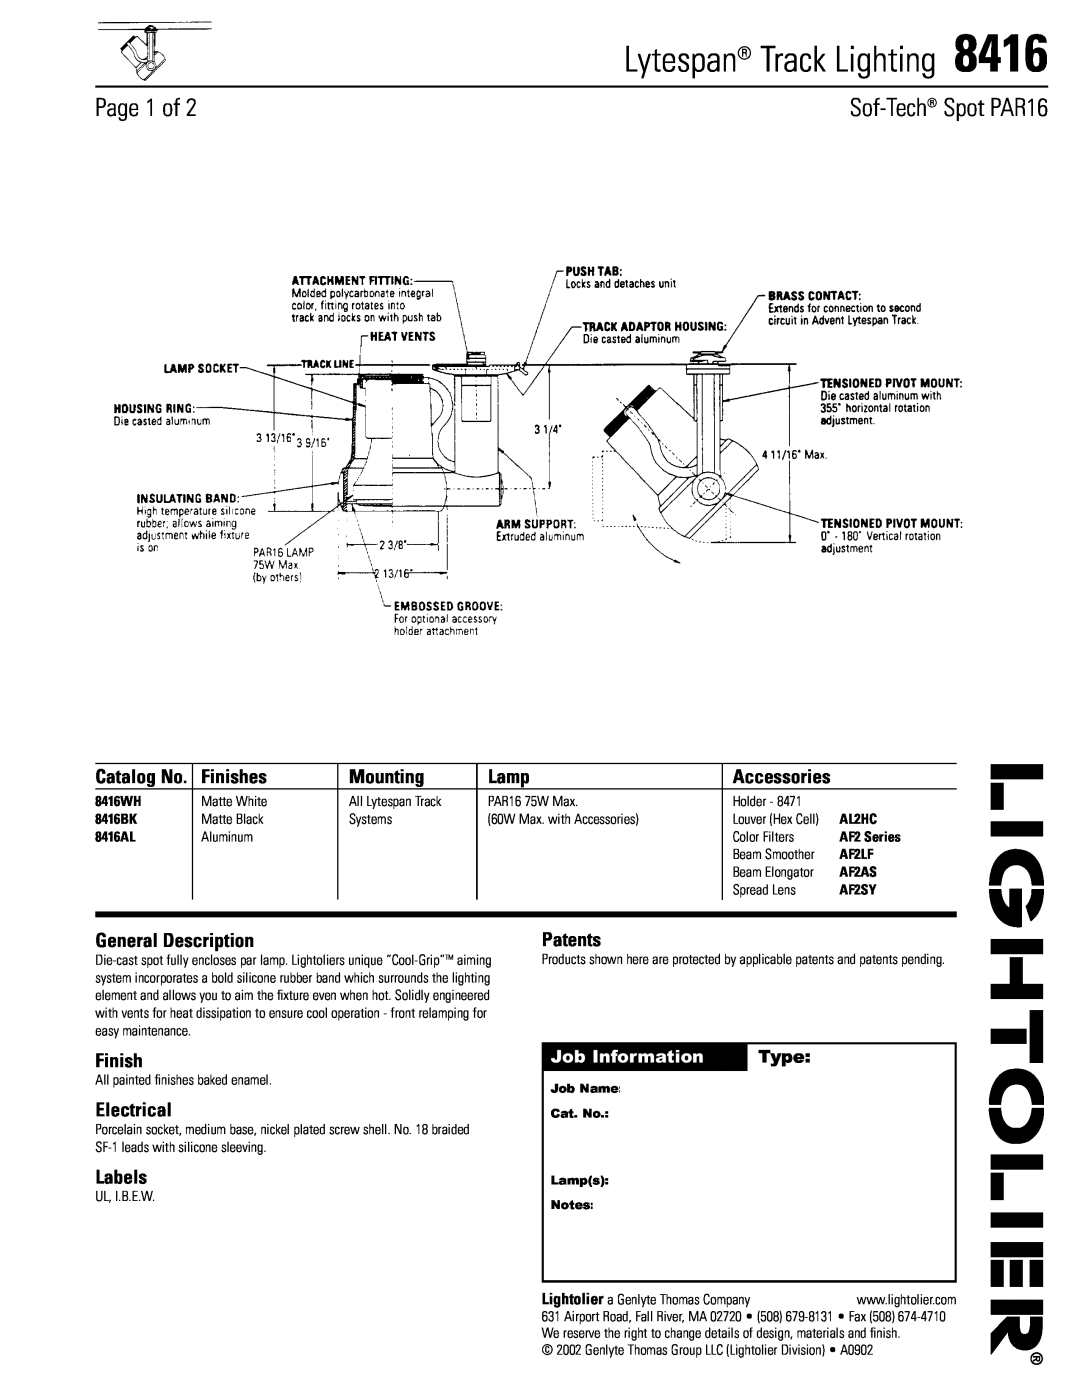 Lightolier 8416 manual Lytespan Track Lighting, Page 1 of, Sof-Tech Spot PAR16, Finishes, Mounting, Lamp, Electrical, Type 